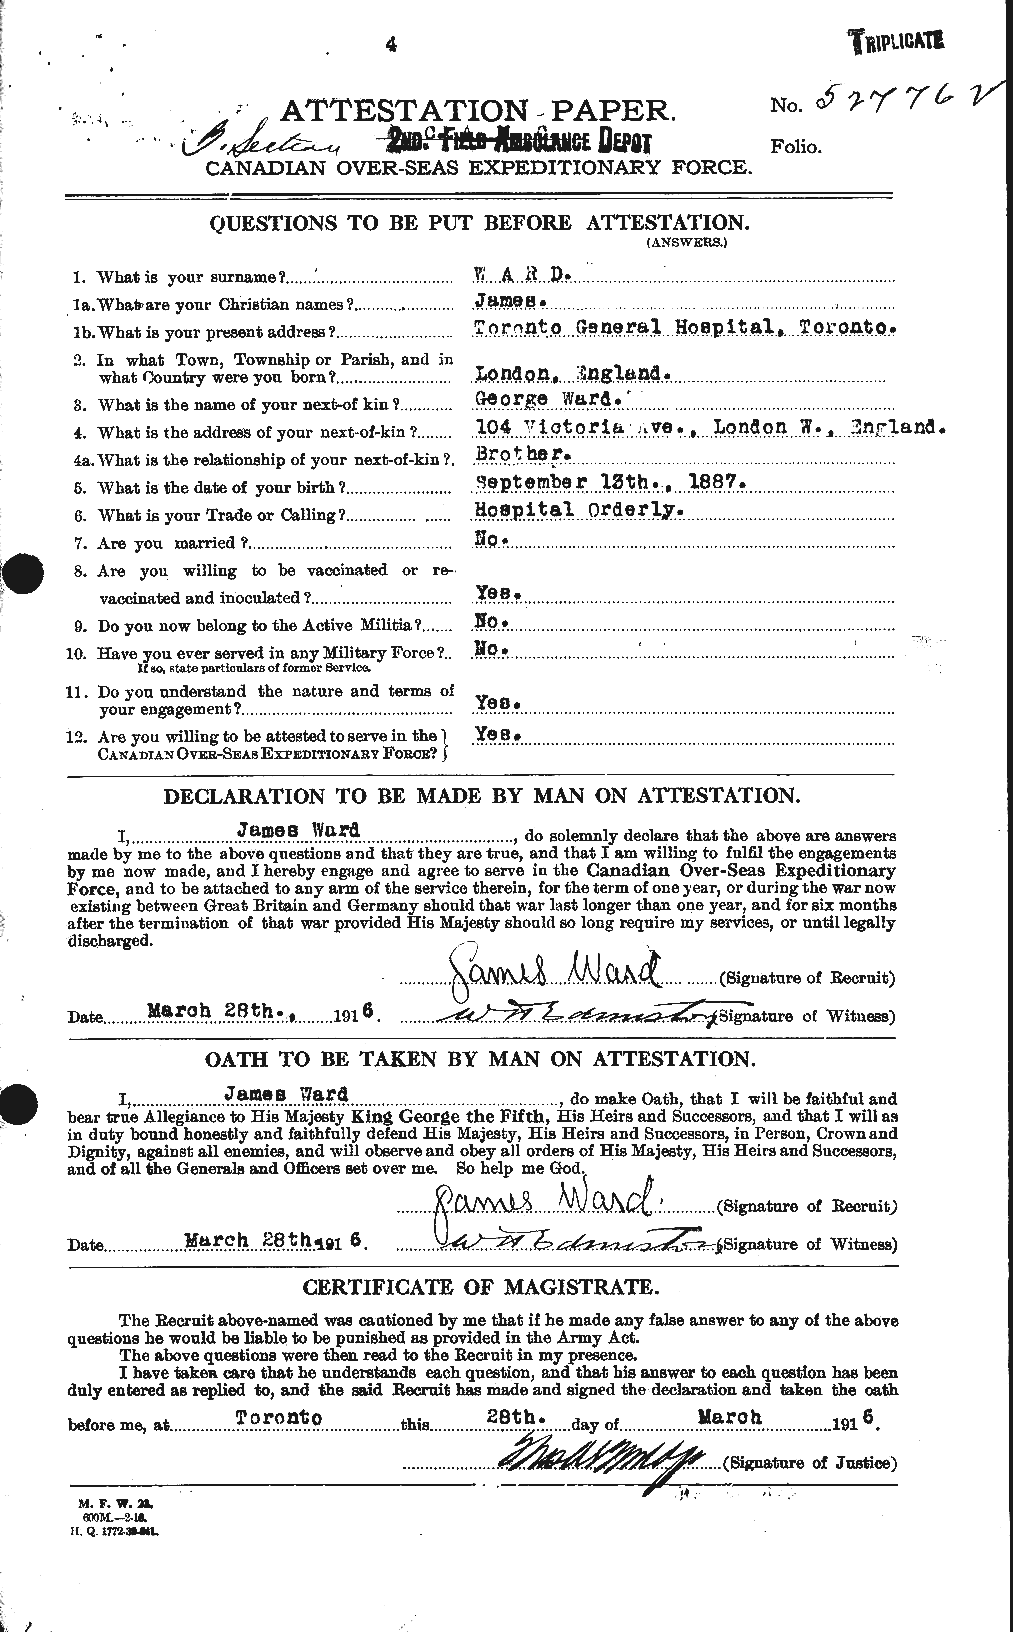 Personnel Records of the First World War - CEF 657895a